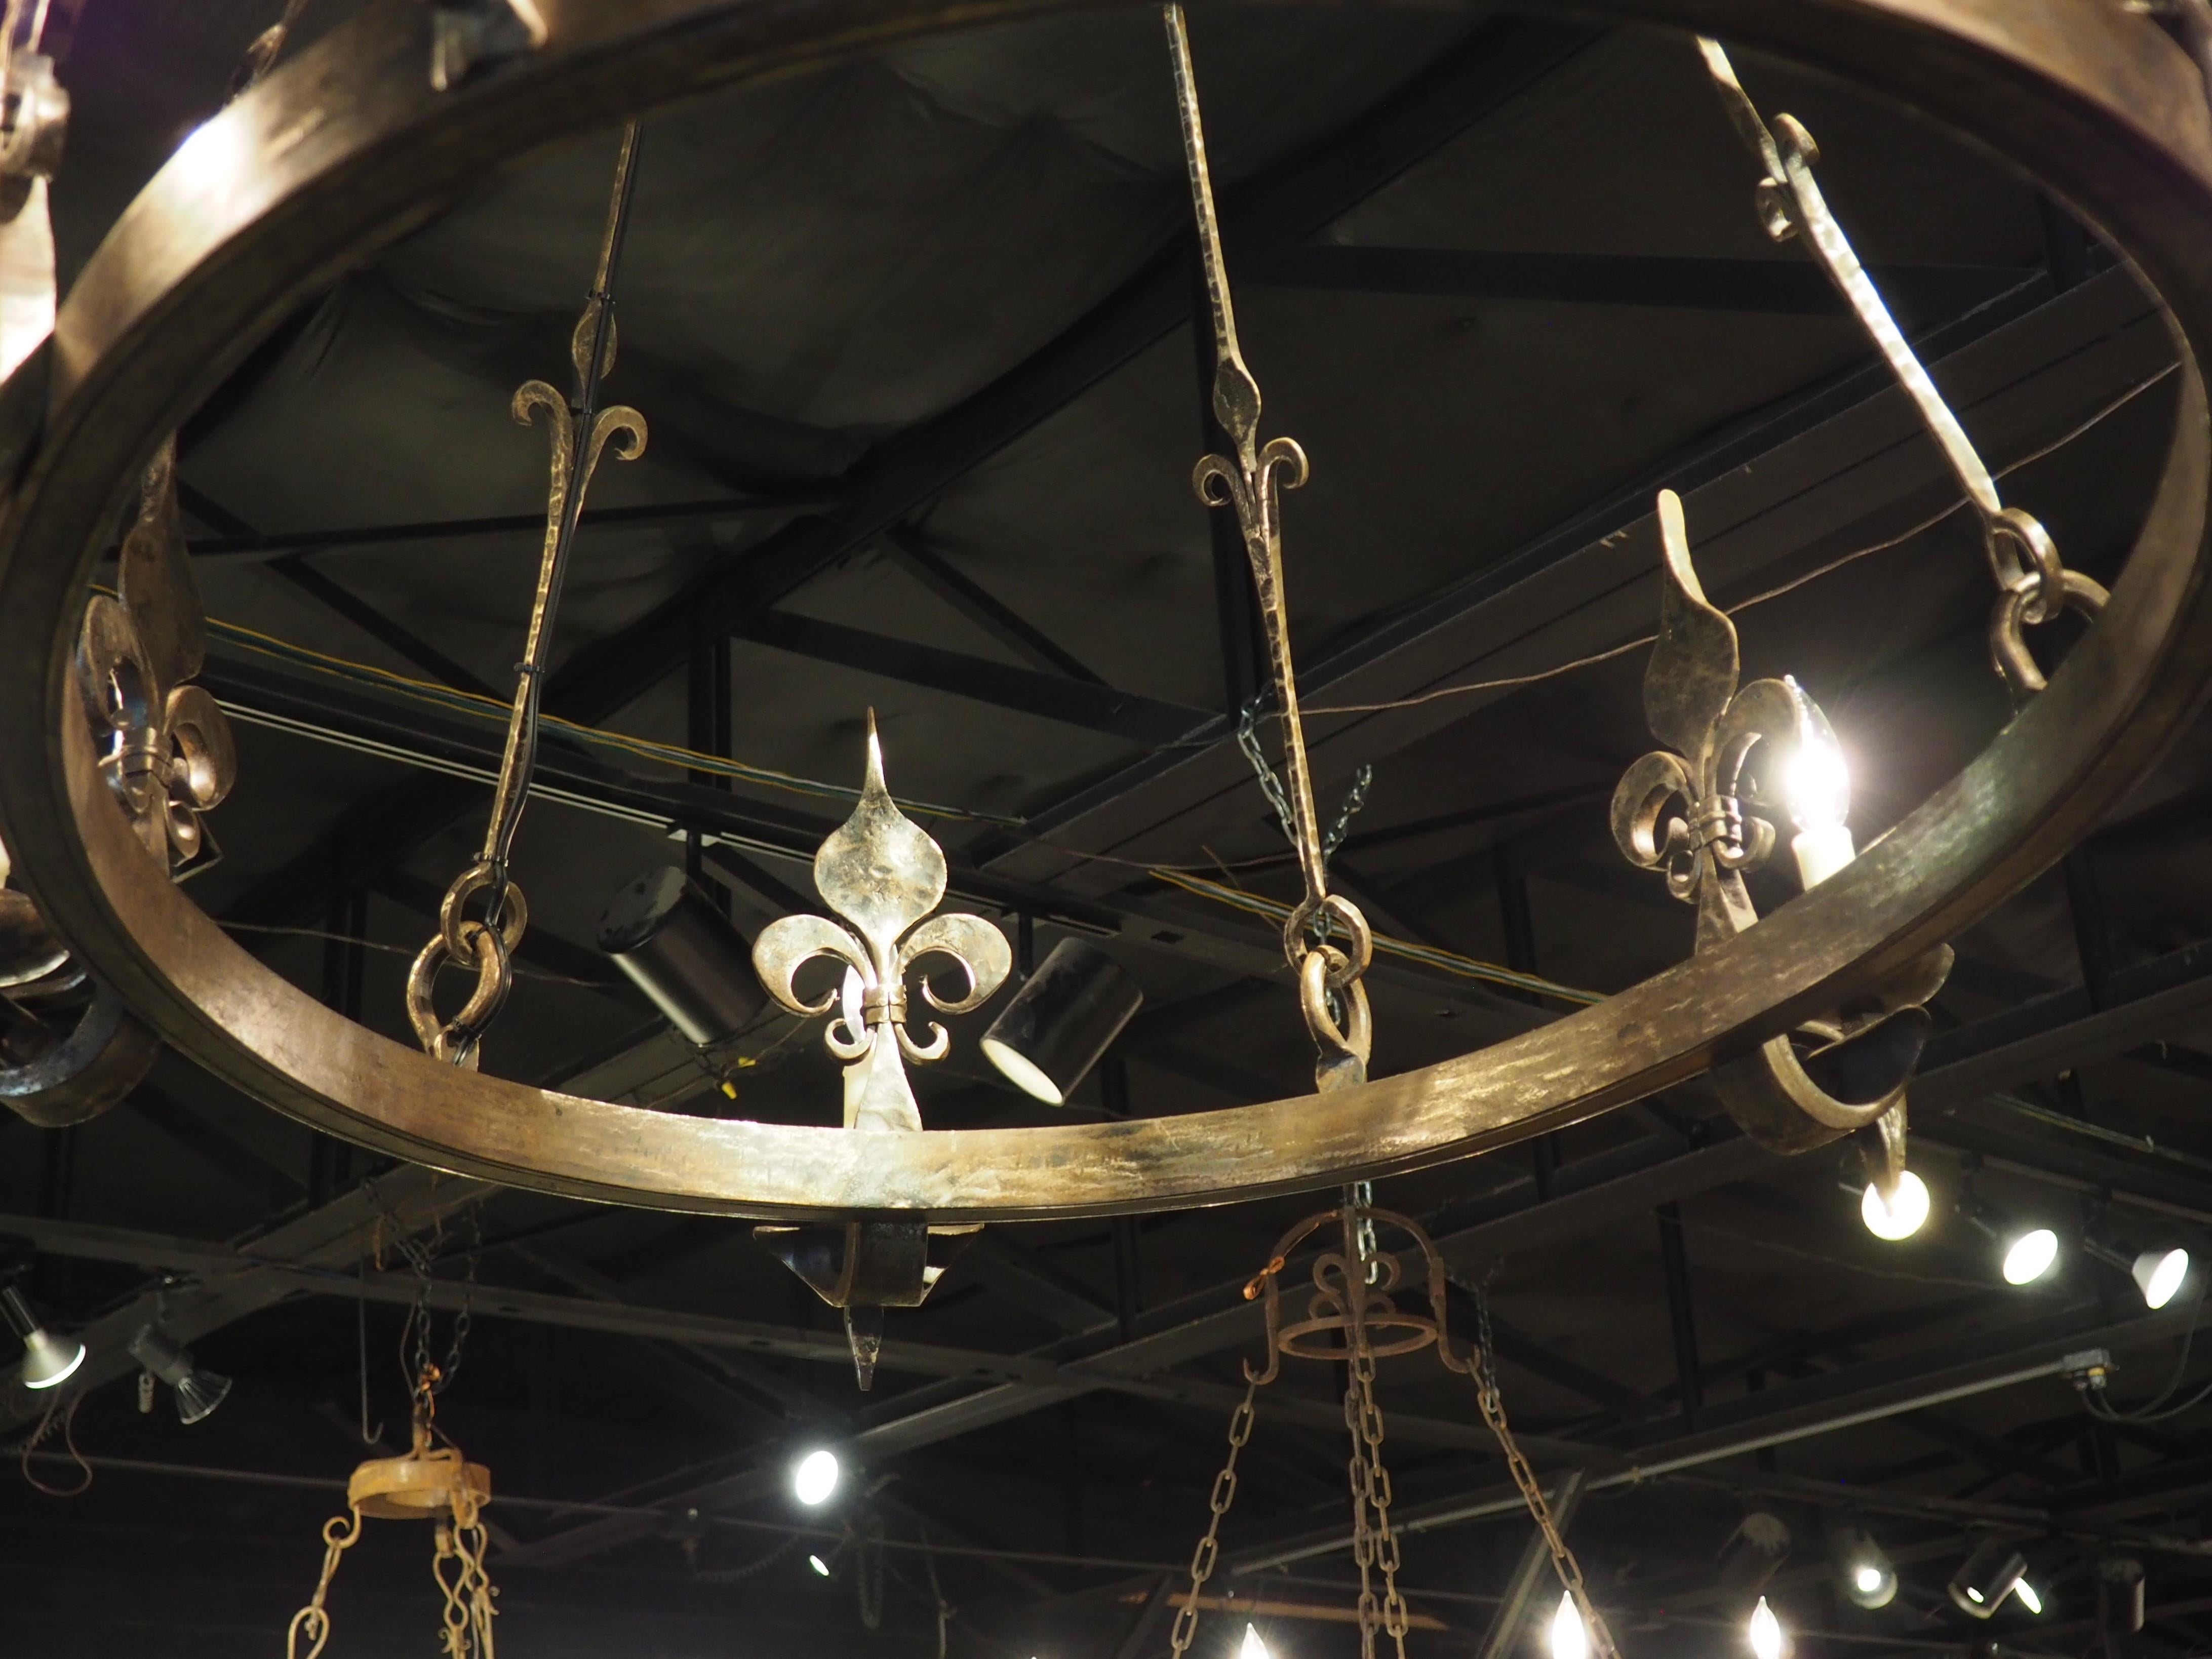 Medieval 1960s Hand Wrought Iron Oval Fleur De Lys Chandelier from Brittany, France For Sale